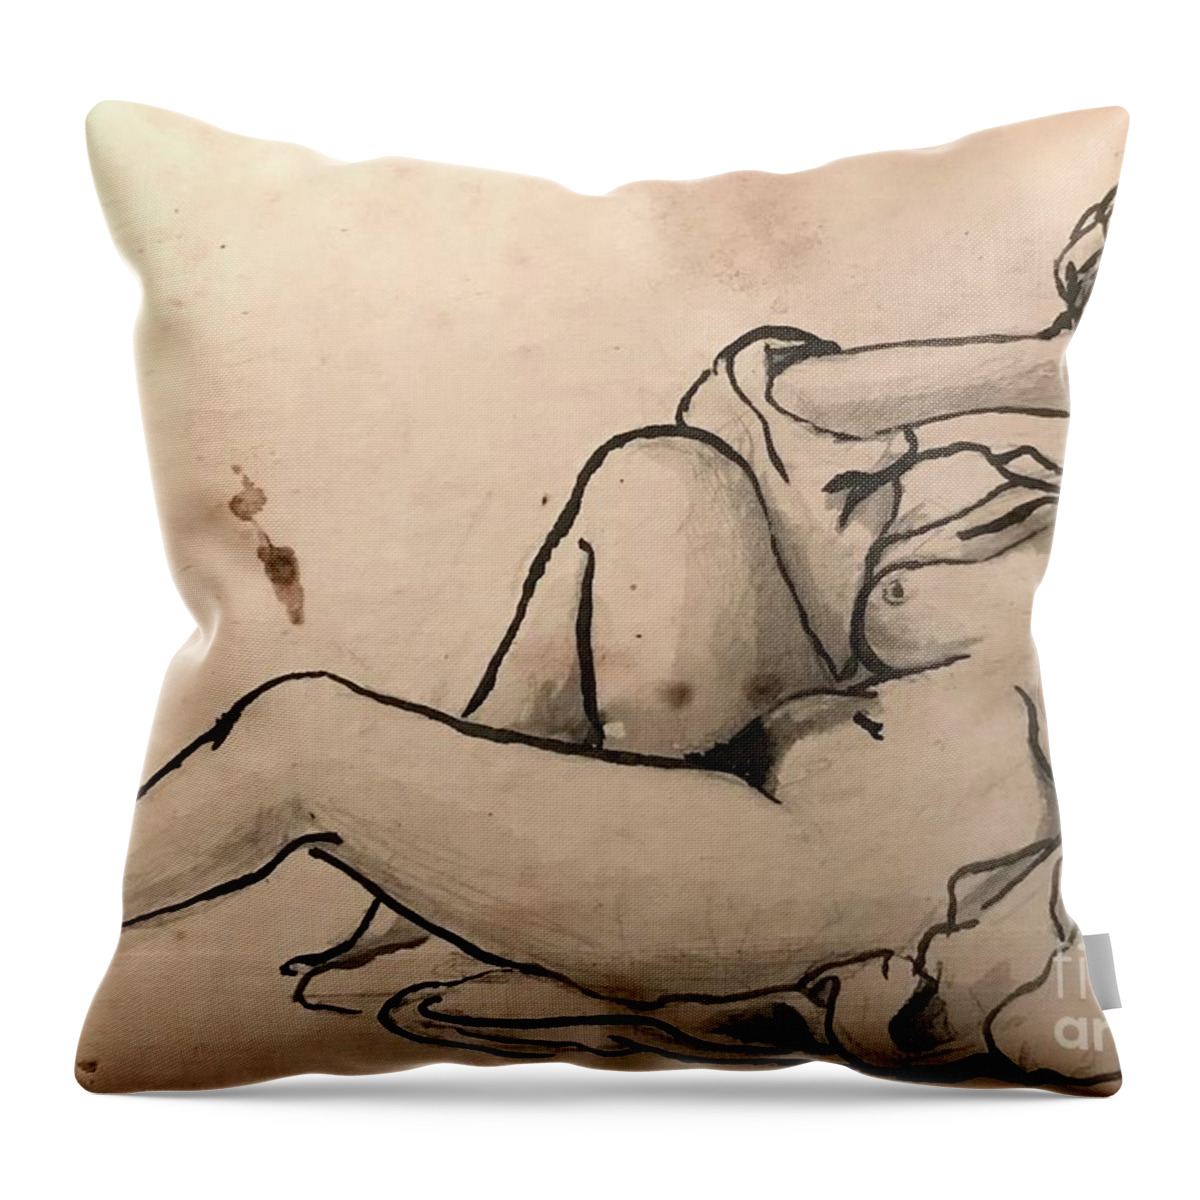 Sumi Ink Throw Pillow featuring the drawing Alice Reclined by M Bellavia